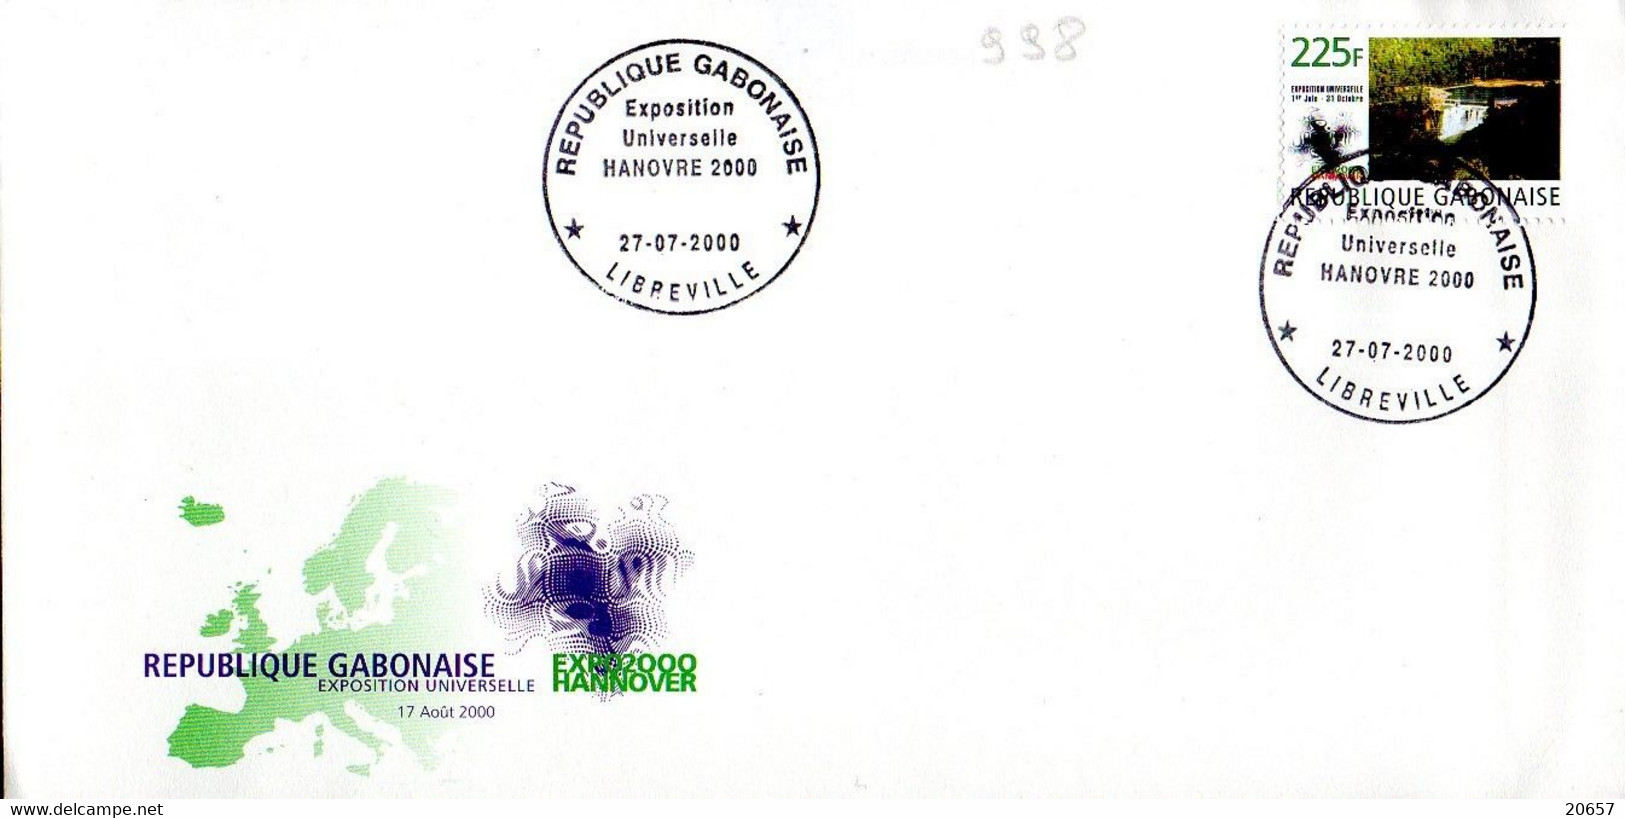 GABON 0998 Fdc Exposition Universelle Hanovre Germany 2000, Deutchland Hannover - 2000 – Hannover (Germania)